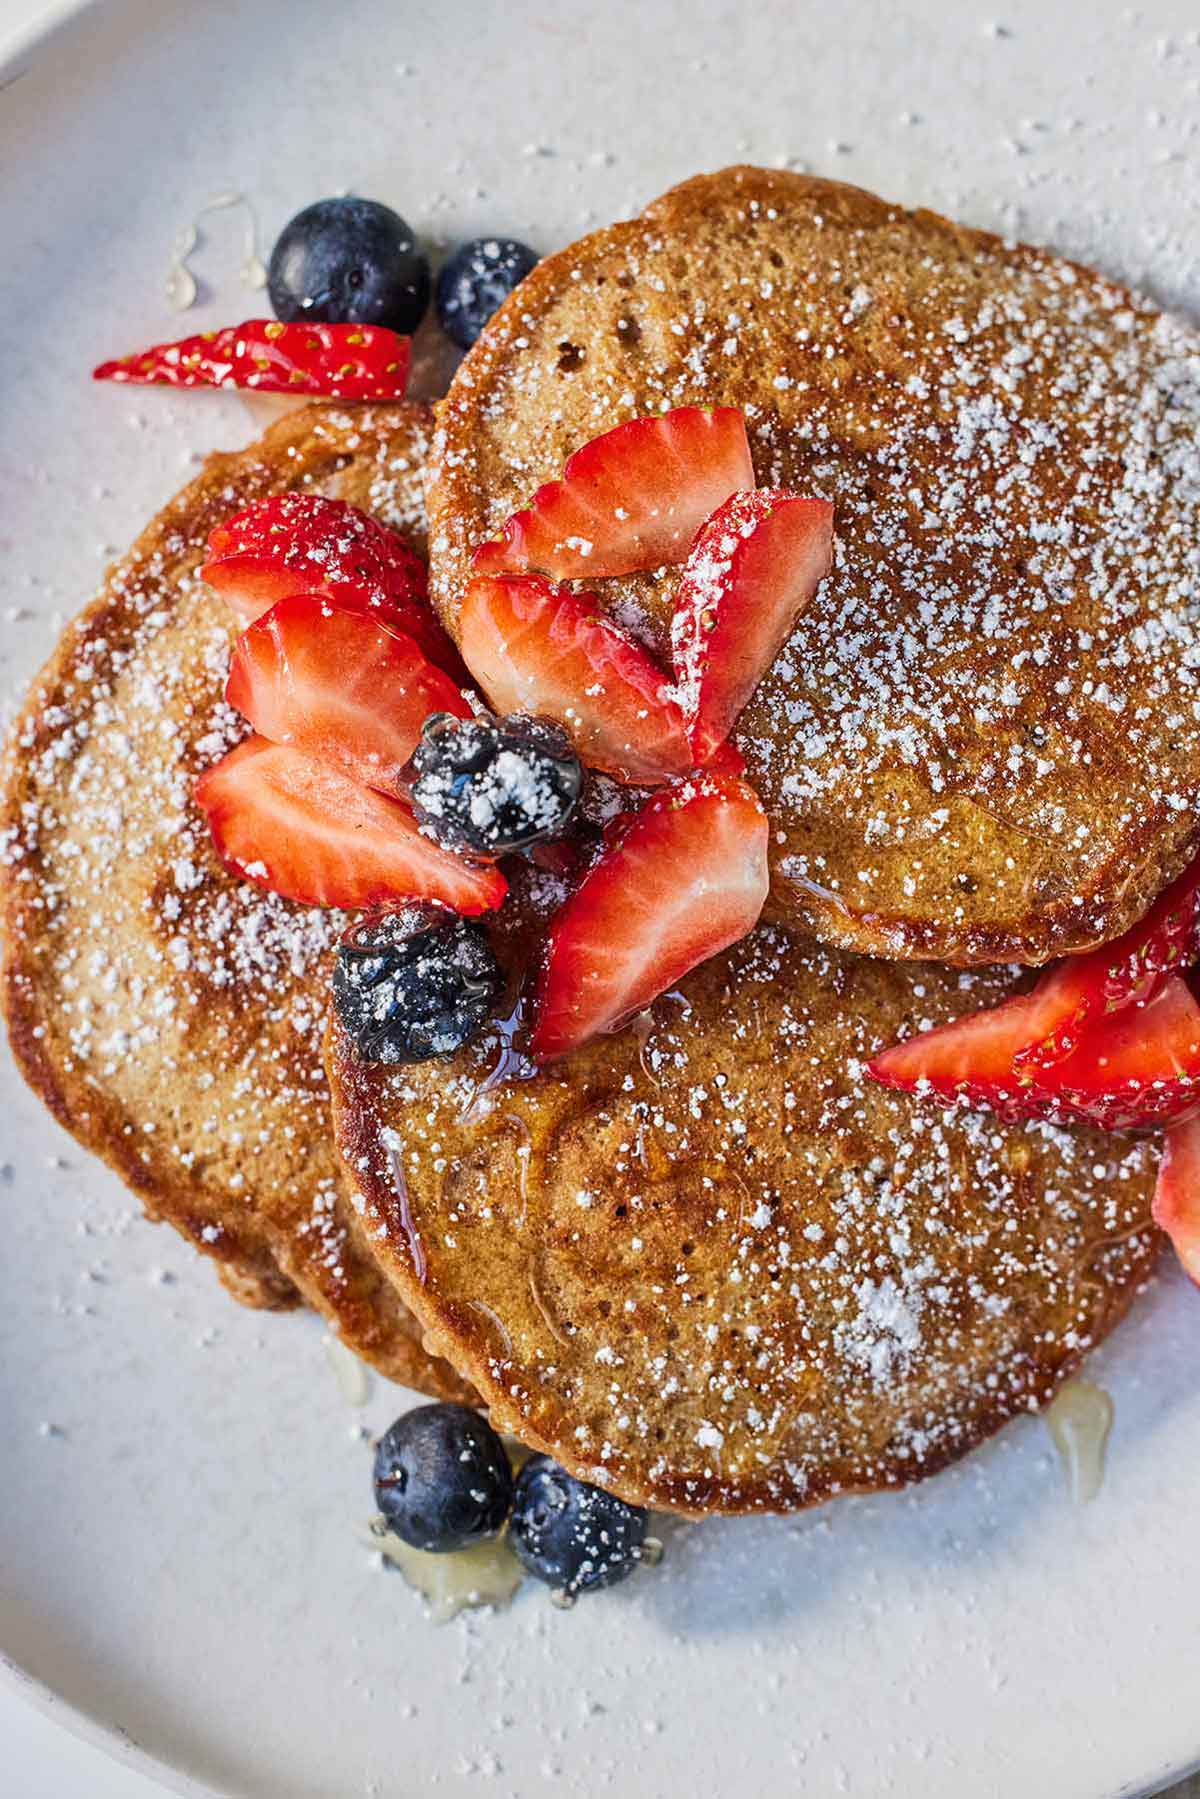 Overhead view of a plate with three whole wheat pancakes with fruit on top.